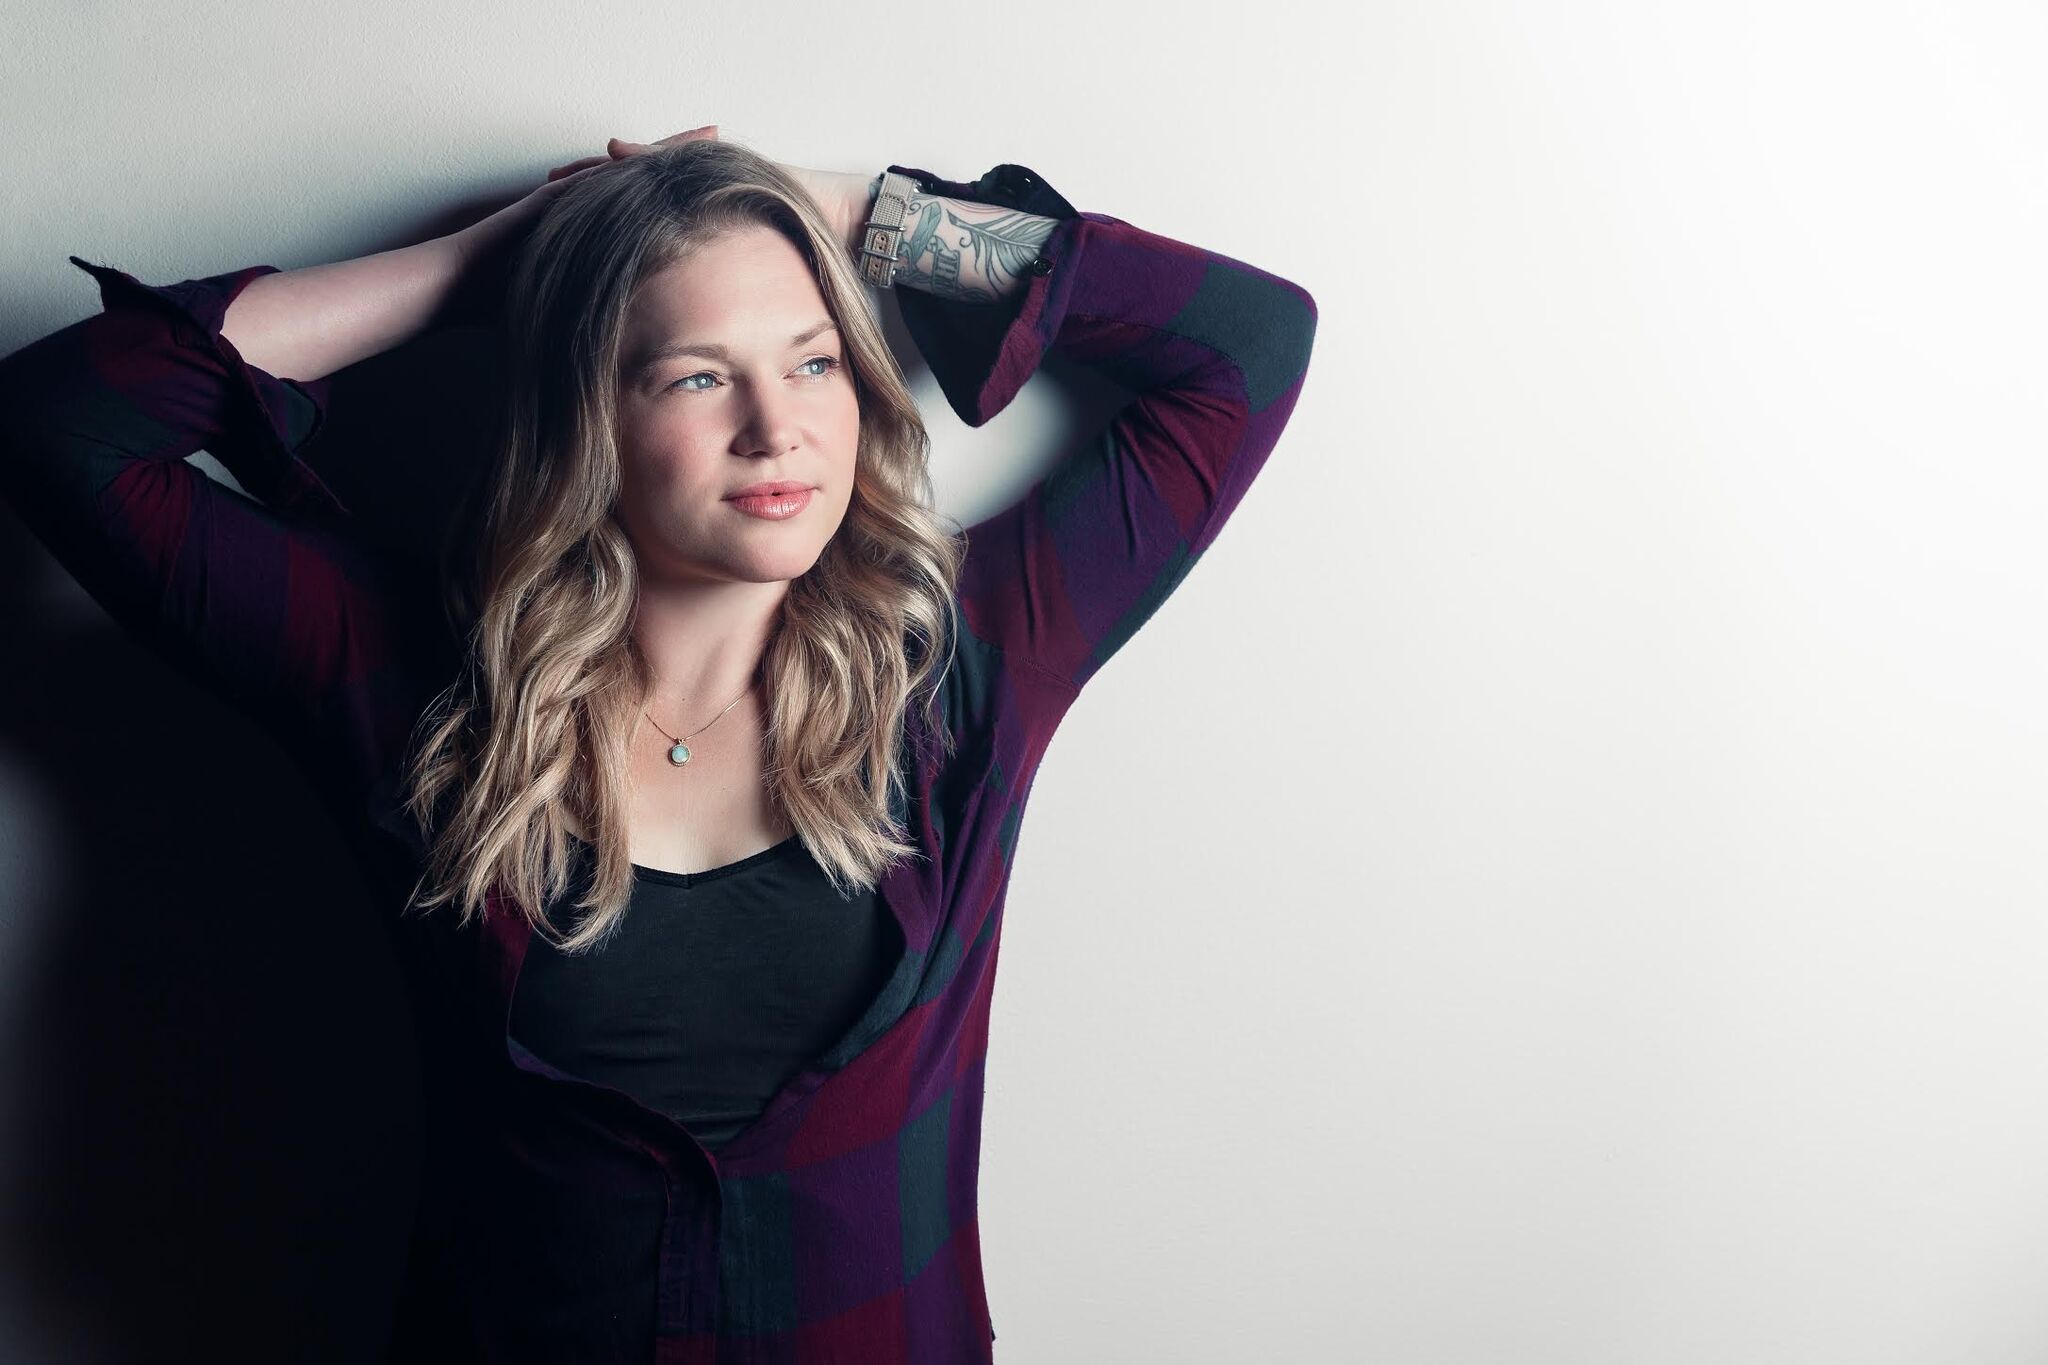 Video Premiere: Crystal Bowersox’s “Until Then” – Cowboys and Indians